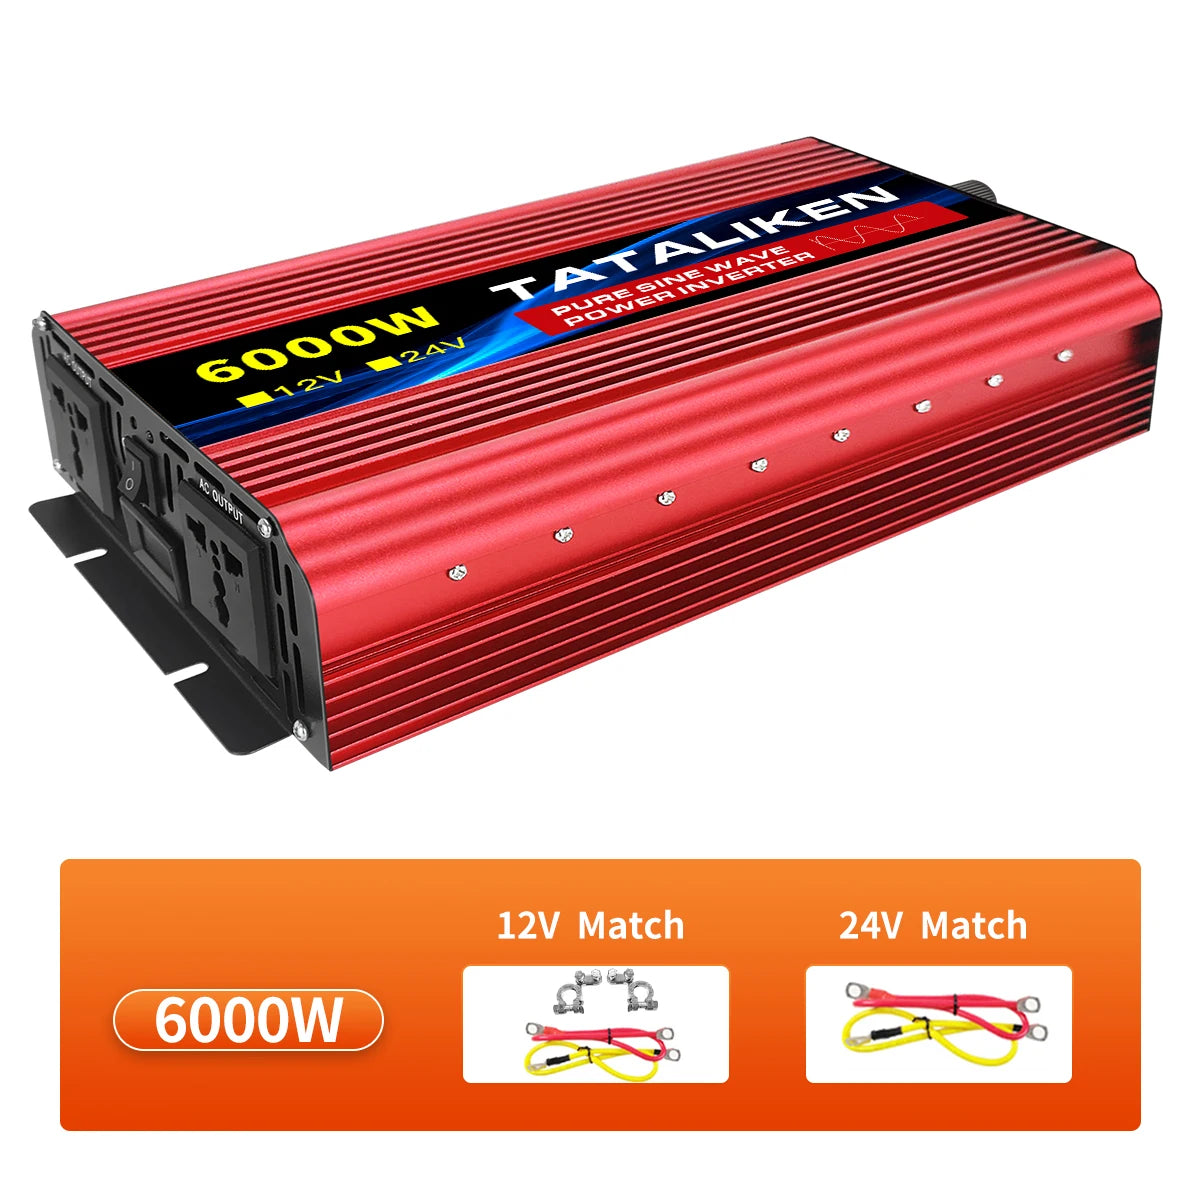 pure sine wave inverter, Universal power converter with AC 220V output, 1500W rating and CE certification from Mainland China.